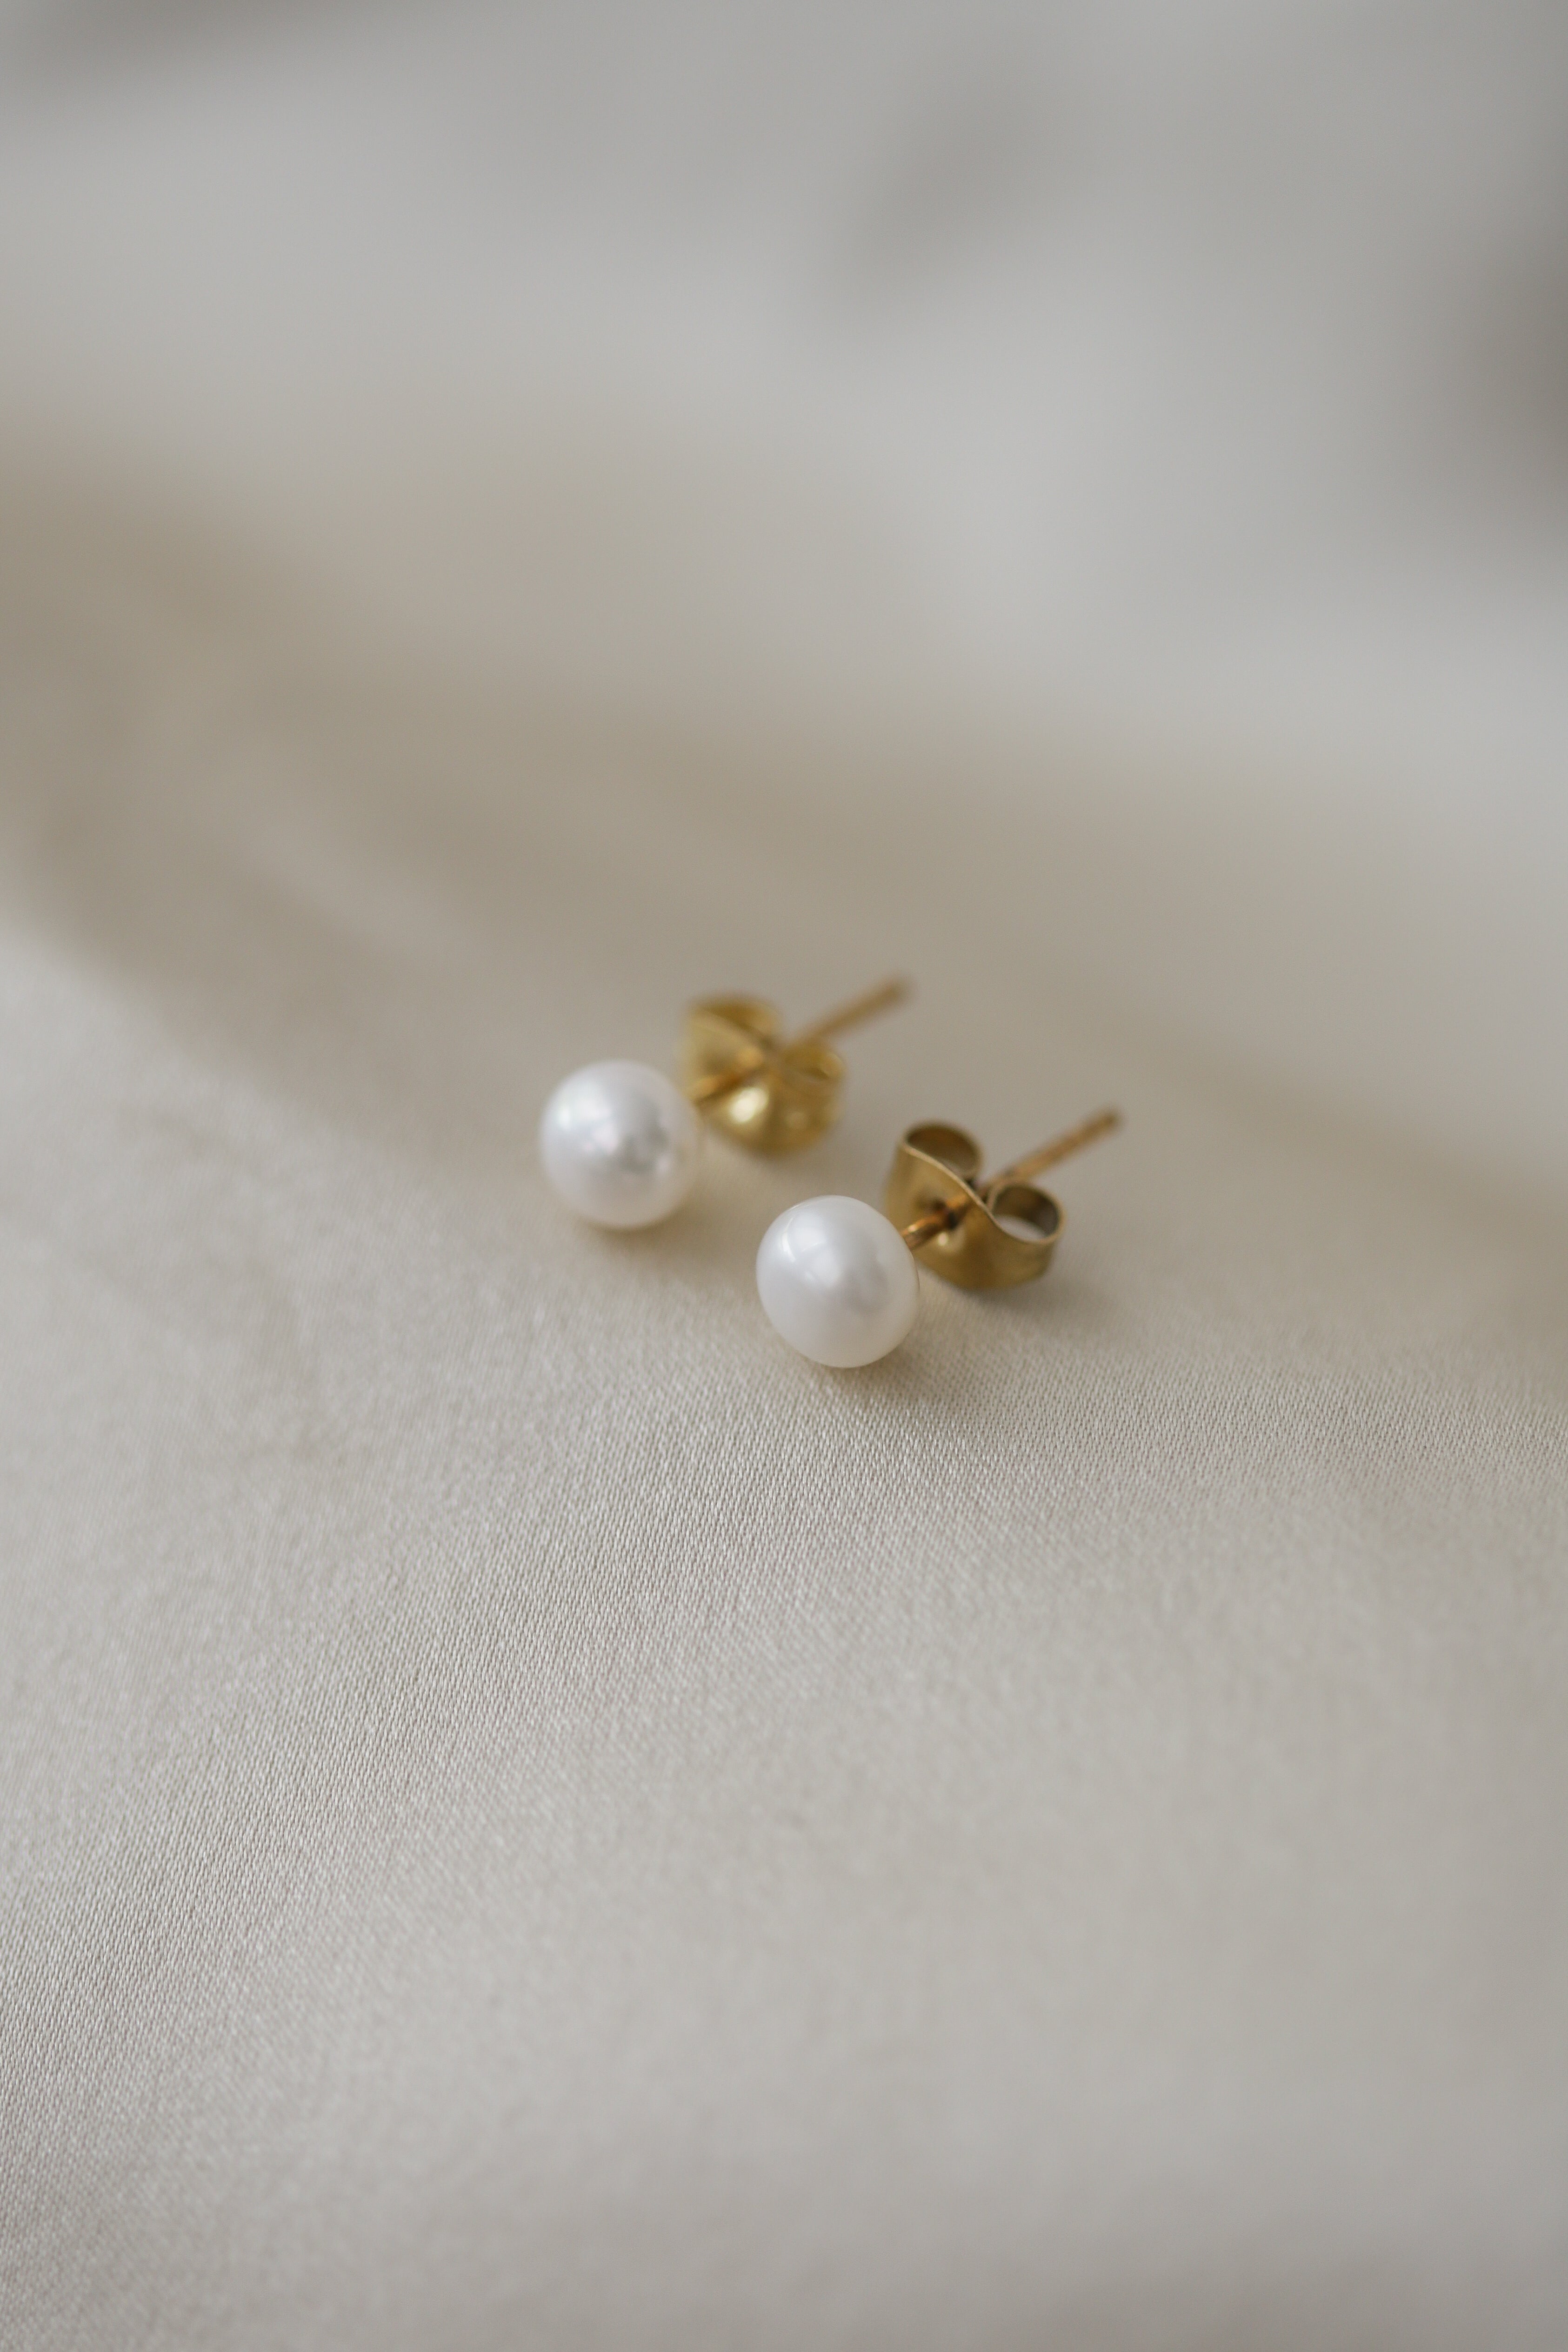 Xia Studs - Boutique Minimaliste has waterproof, durable, elegant and vintage inspired jewelry